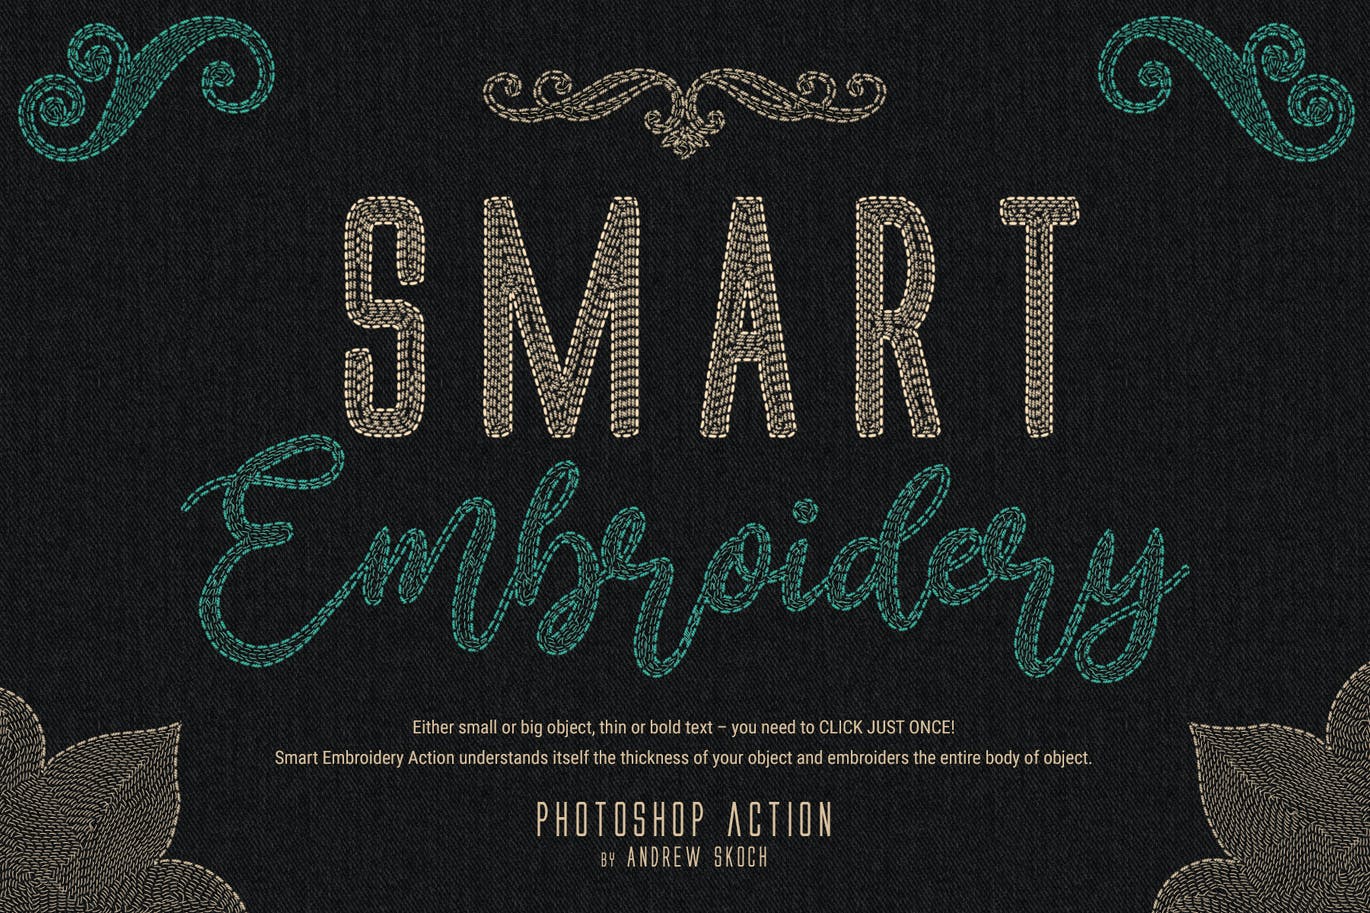 Smart Embroidery - Photoshop Action